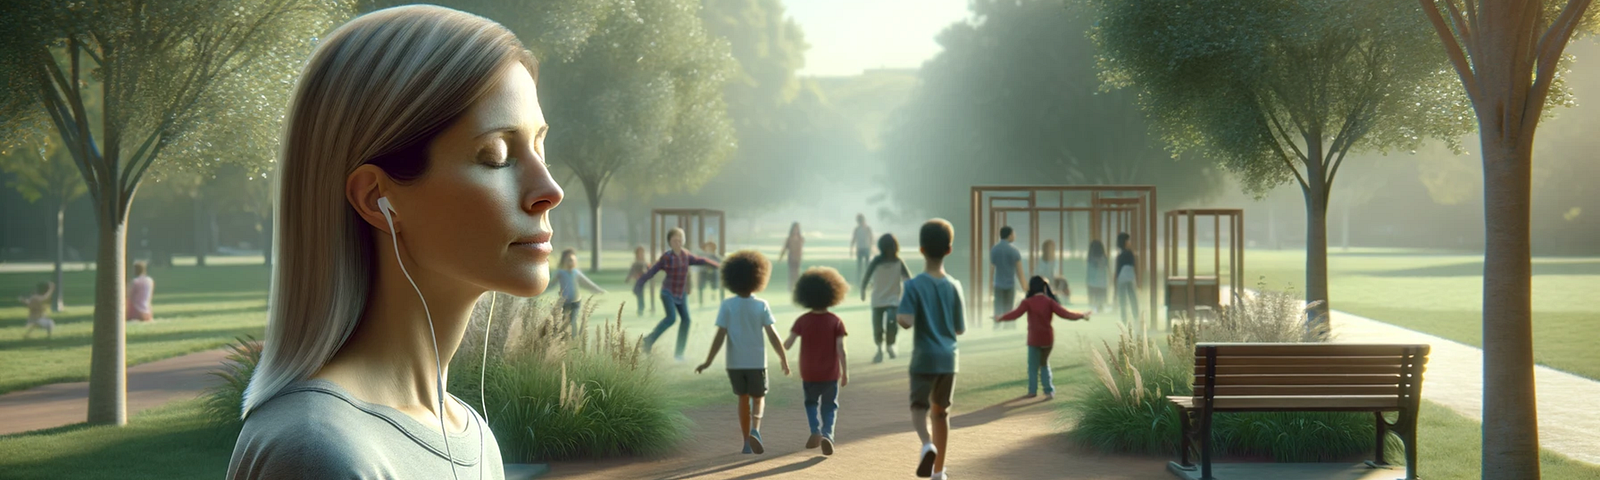 A serene park setting with children playing in the background. A woman stands in the foreground, eyes closed, listening to the surroundings. The atmosphere conveys a sense of community and connection, reflecting her new perspective on collaboration.